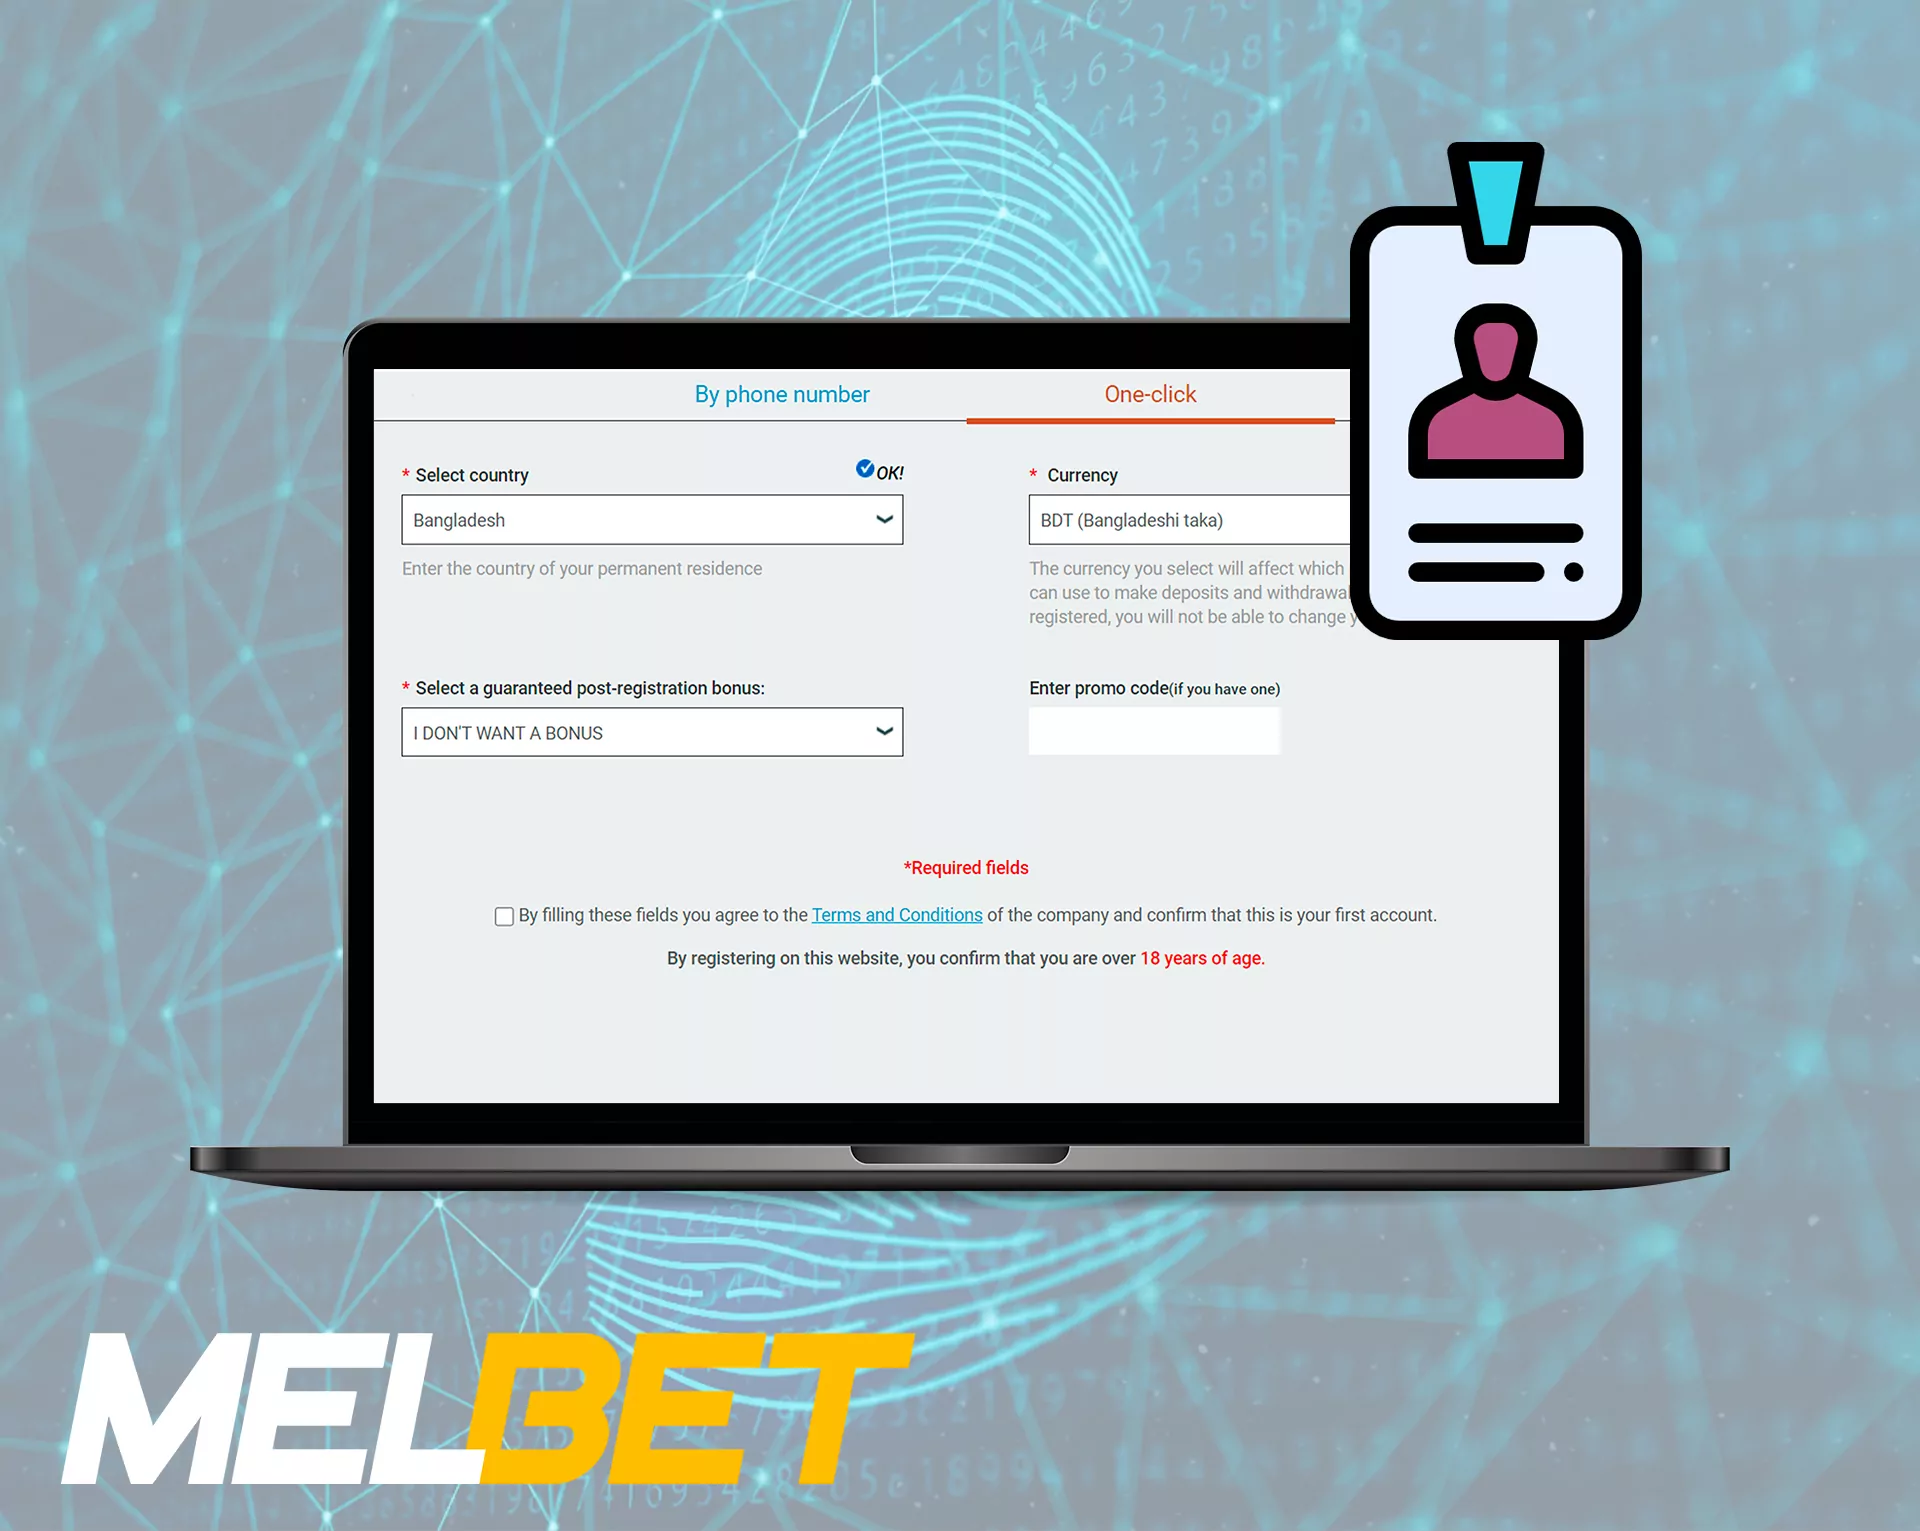 You should verify your Melbet account to withdraw winnings.